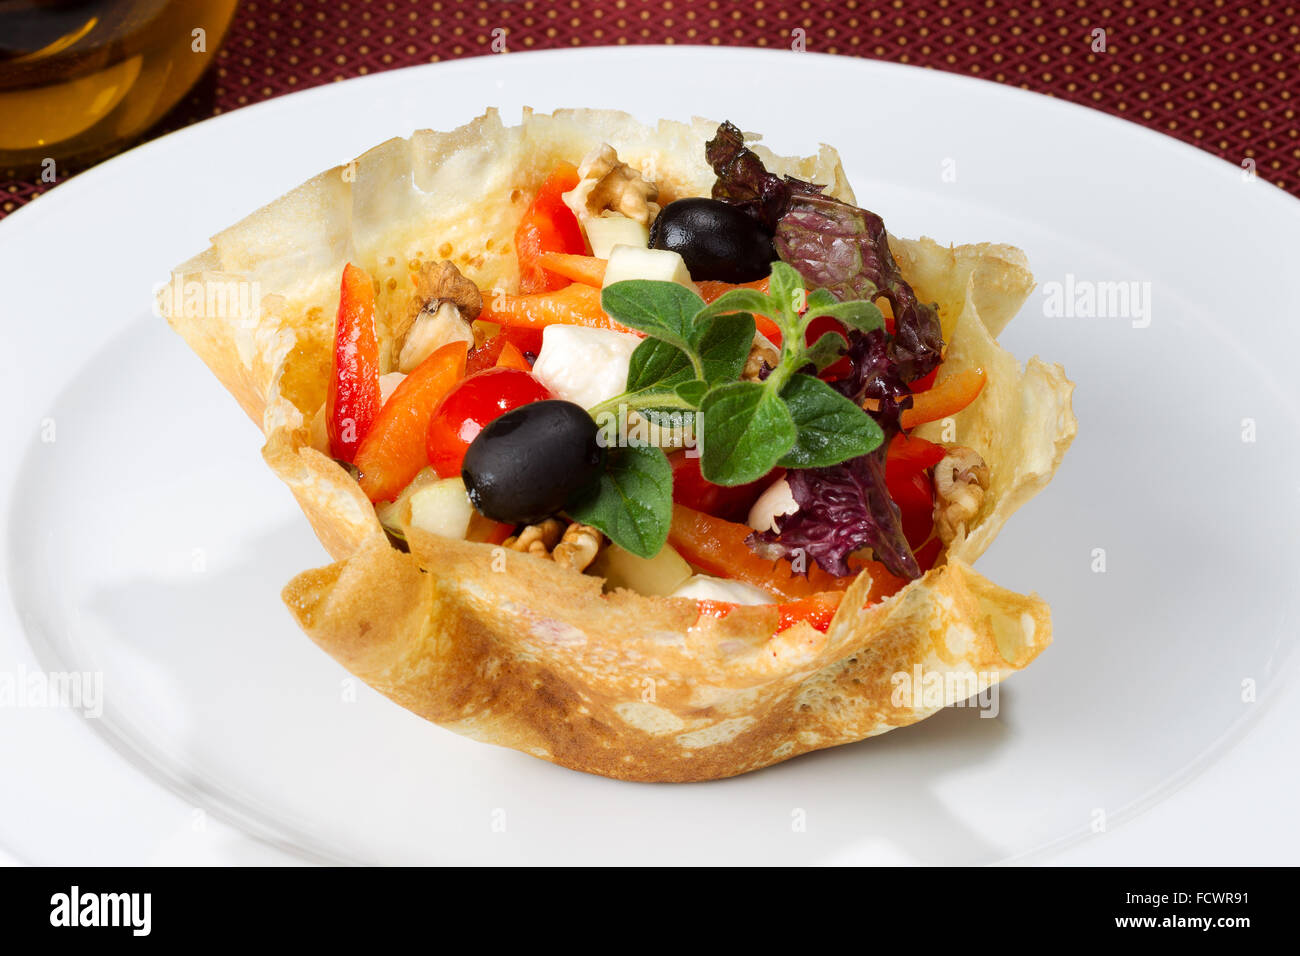 Vegetable salad with feta cheese, olives and nuts inside the pancake on white bowl Stock Photo